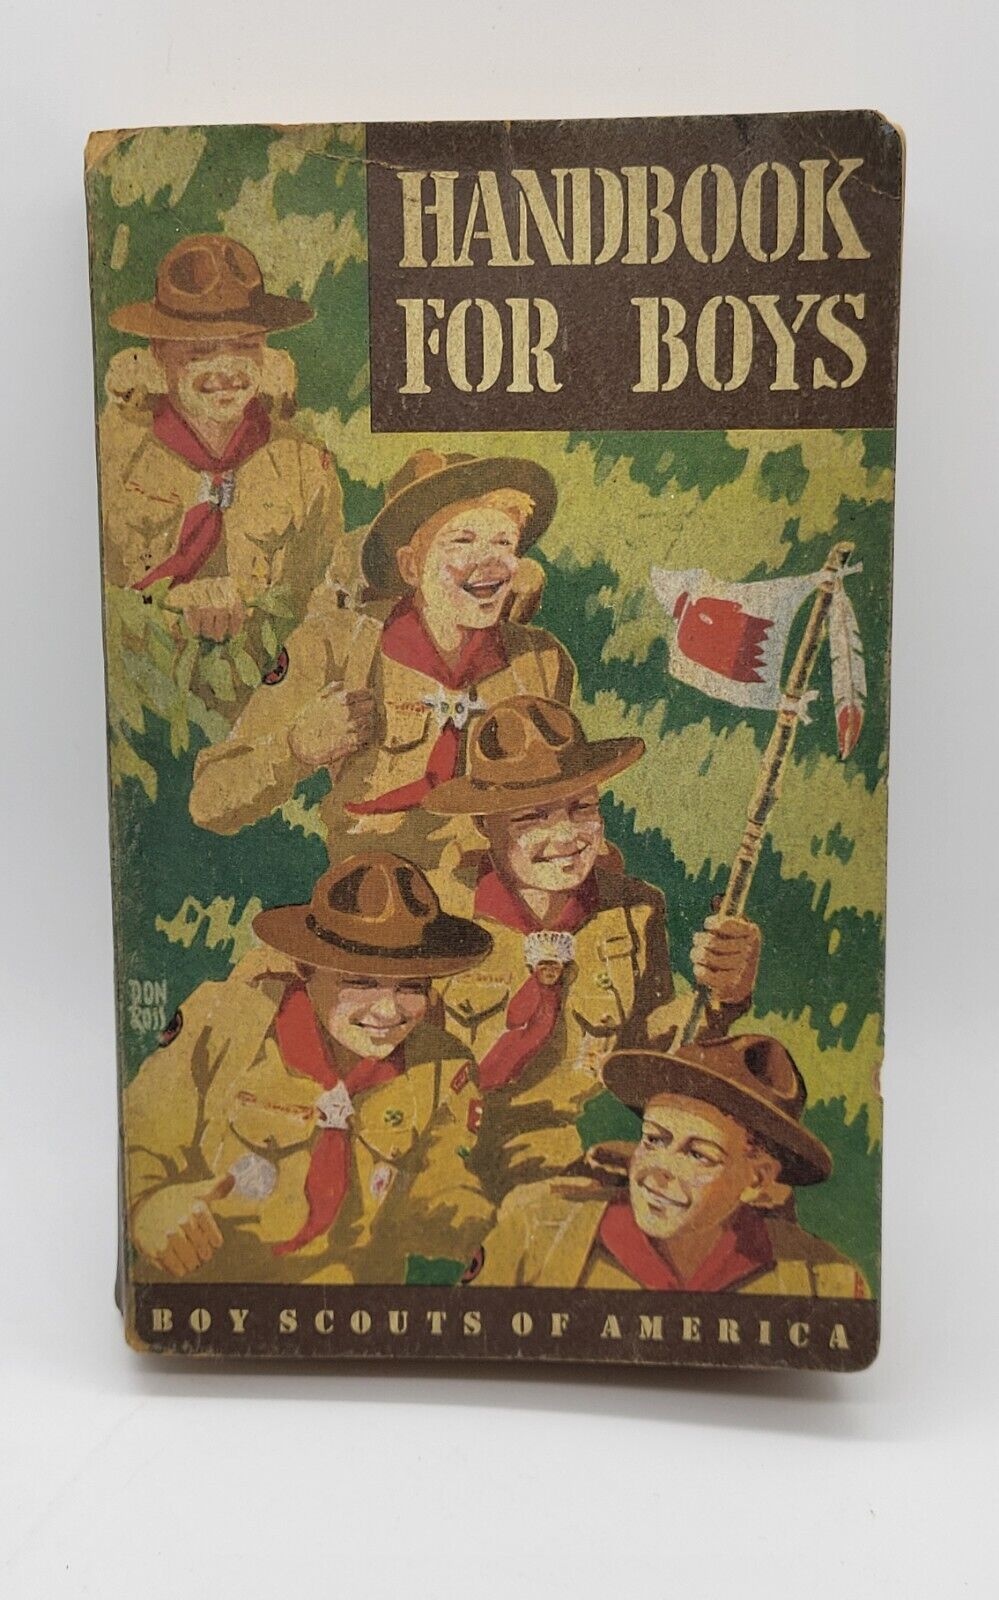 Handbook for Boys  Boy Scouts of America 1948 June 5th Edition 2nd Printing